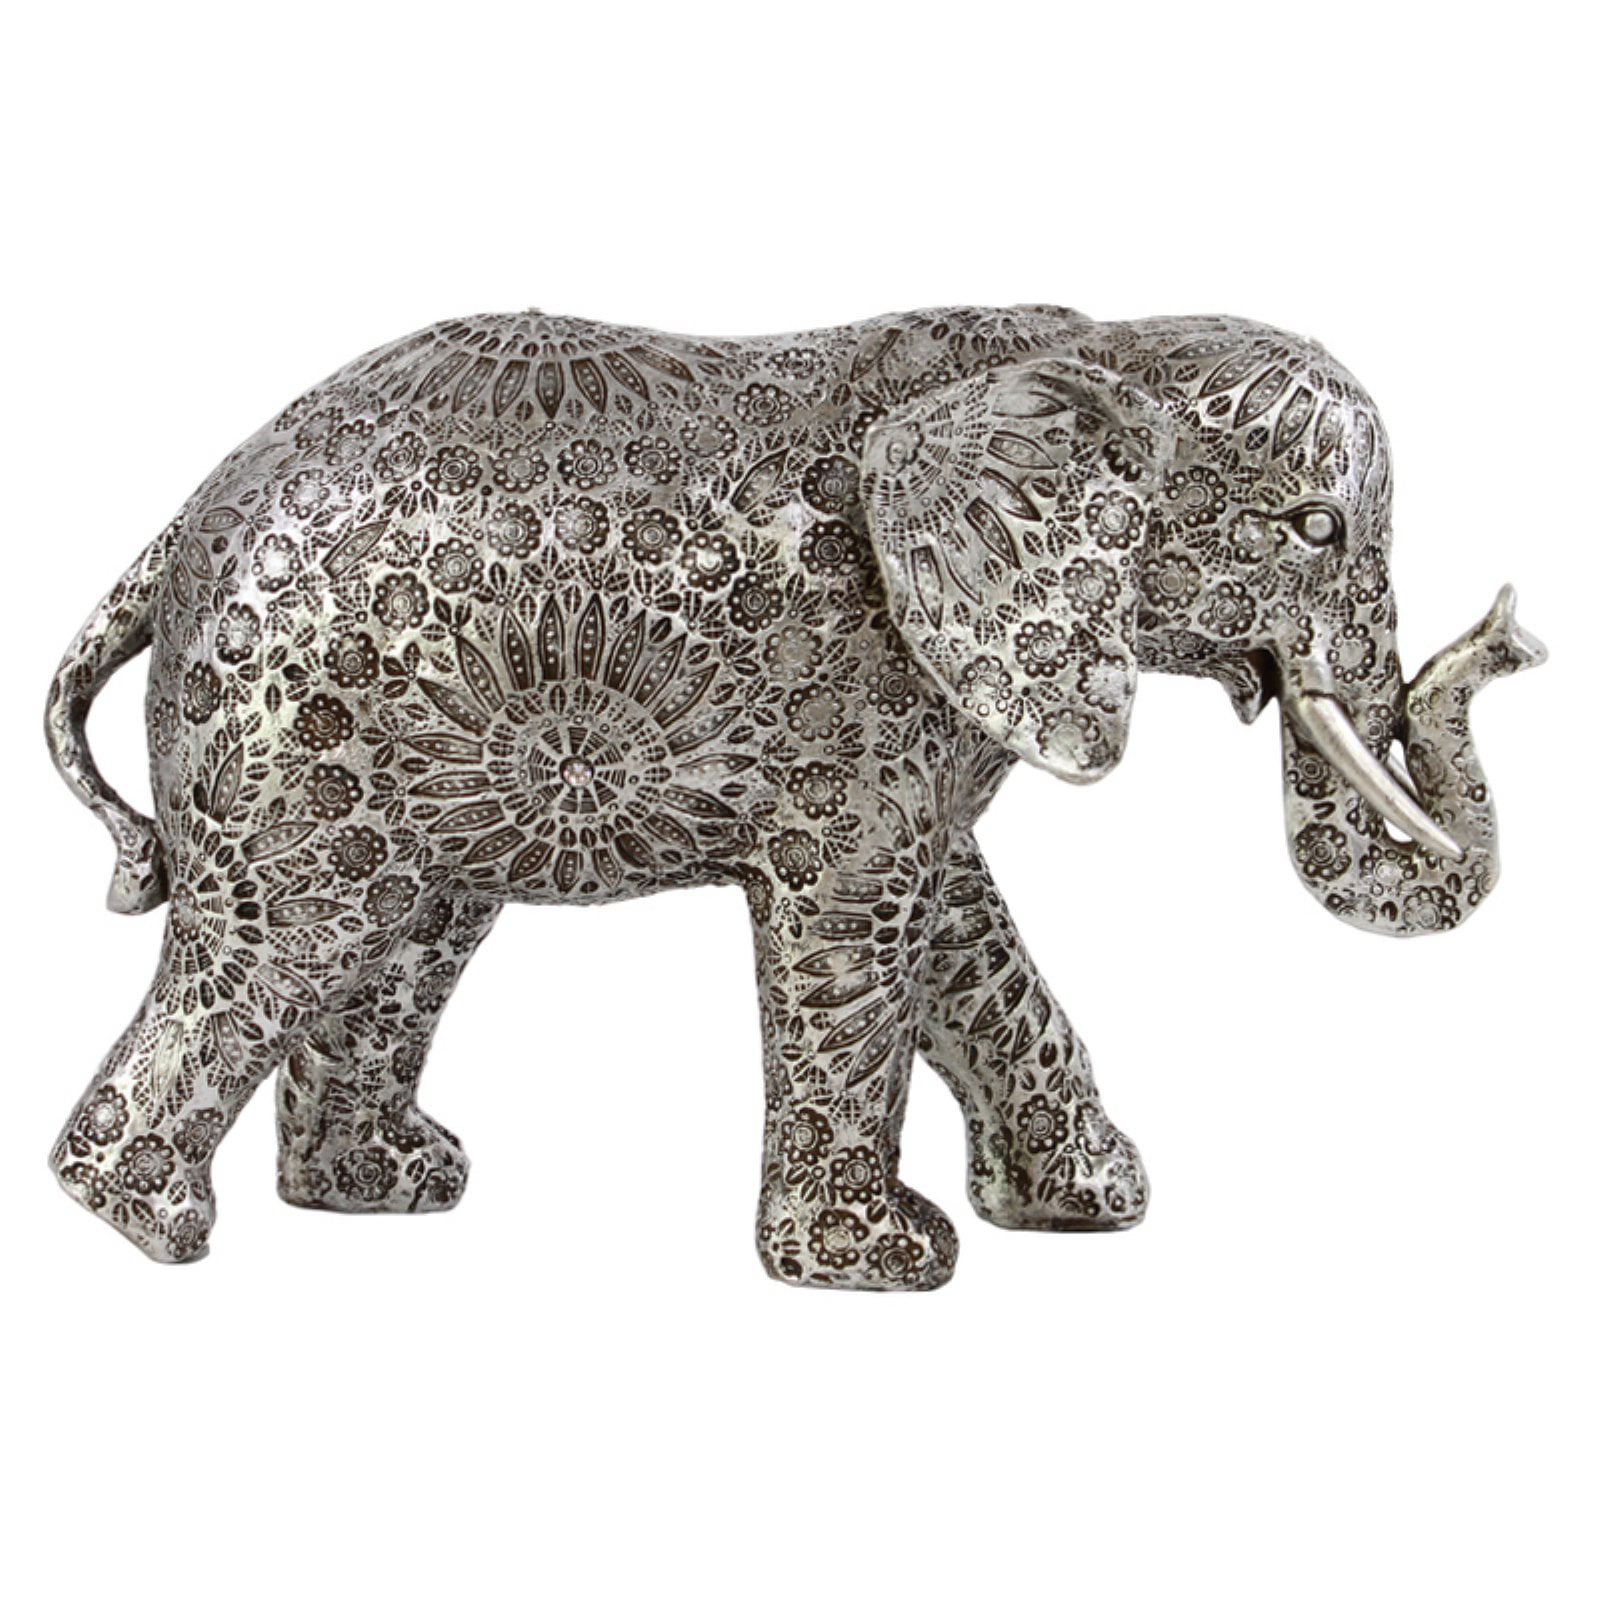 Urban Trends Resin Standing Elephant Figurine with Engraved Design 